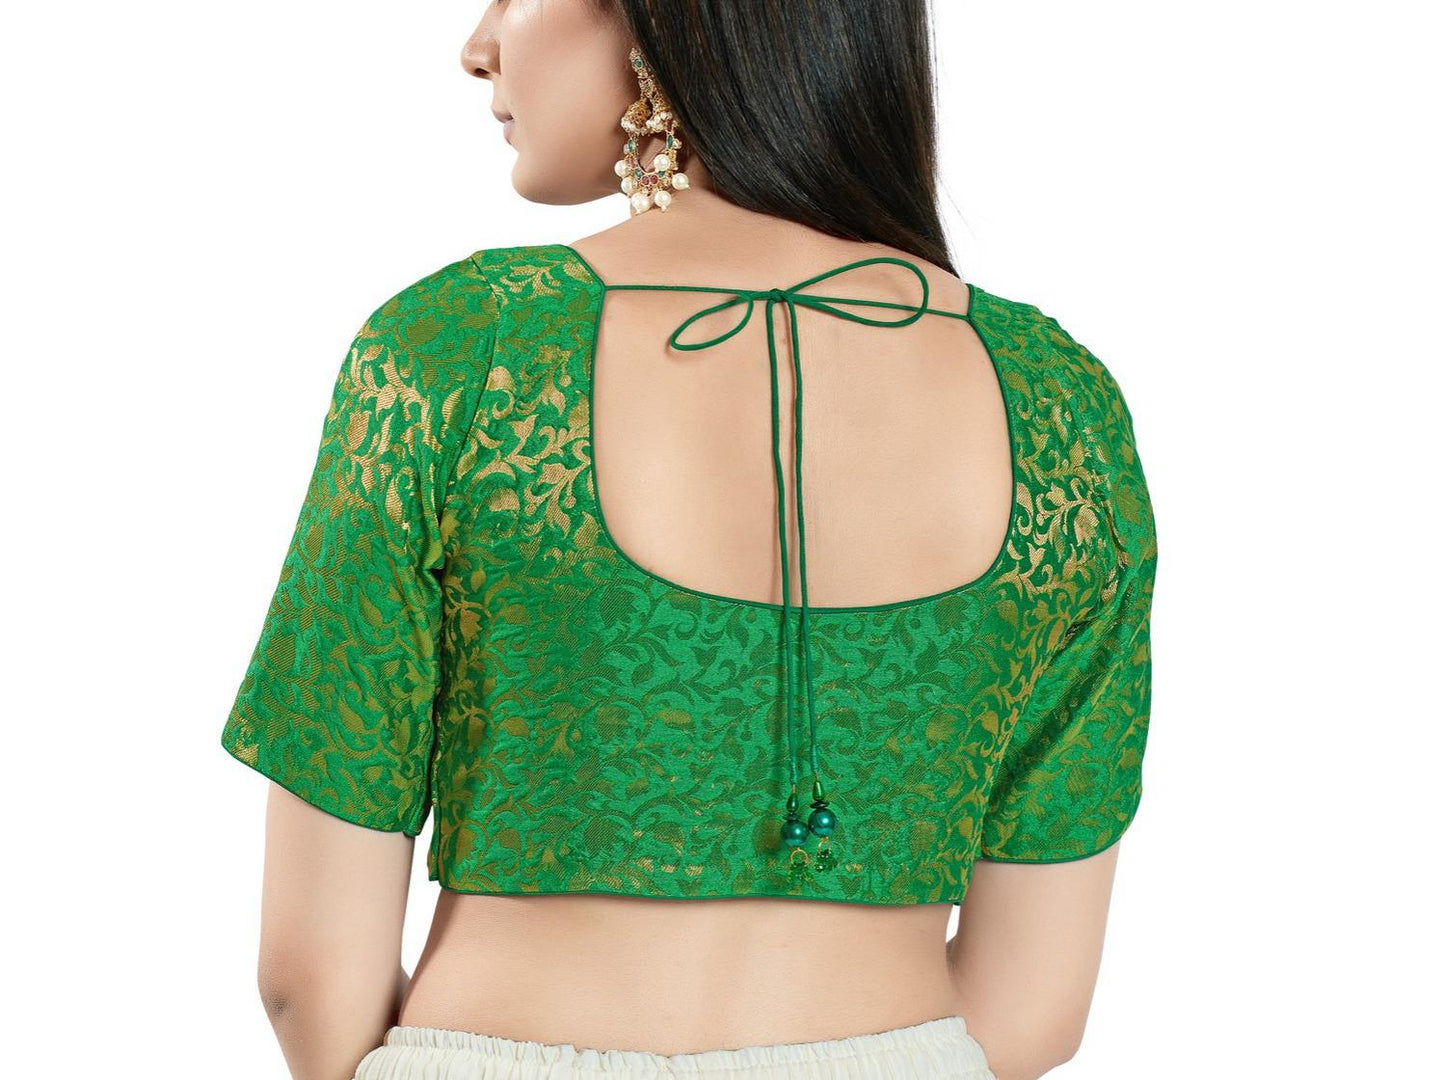 Attractive Green Colored Ready To Wear Brocade Blouse For Women Near Me